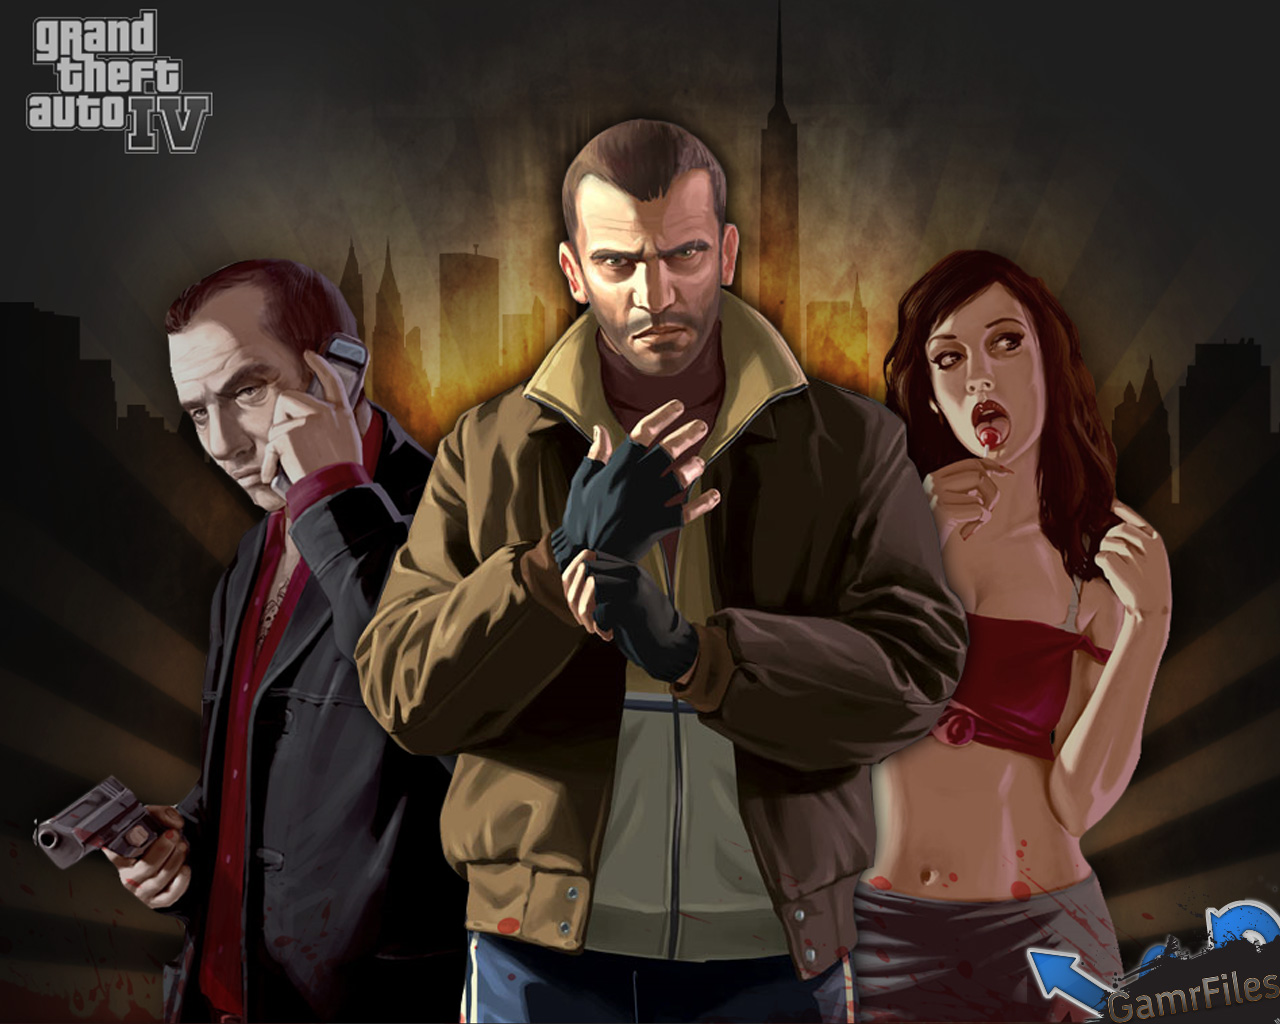 grand theft auto iv, video game